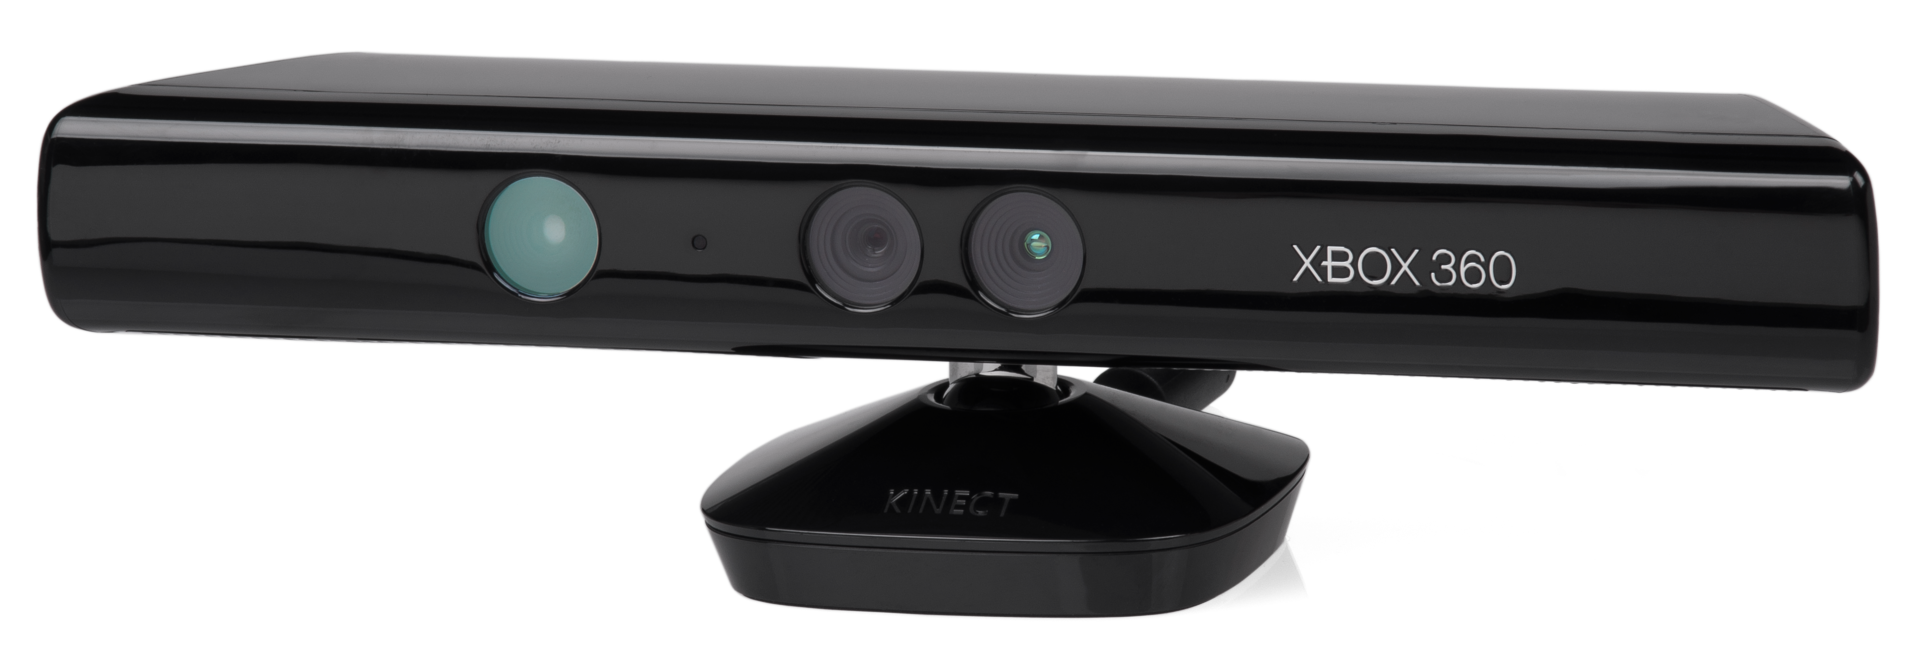 Interpersoonlijk Echt bezorgdheid Kinect for Xbox 360 and Kinect for Windows (KfW) v1 specs | George Birbilis  @zoomicon